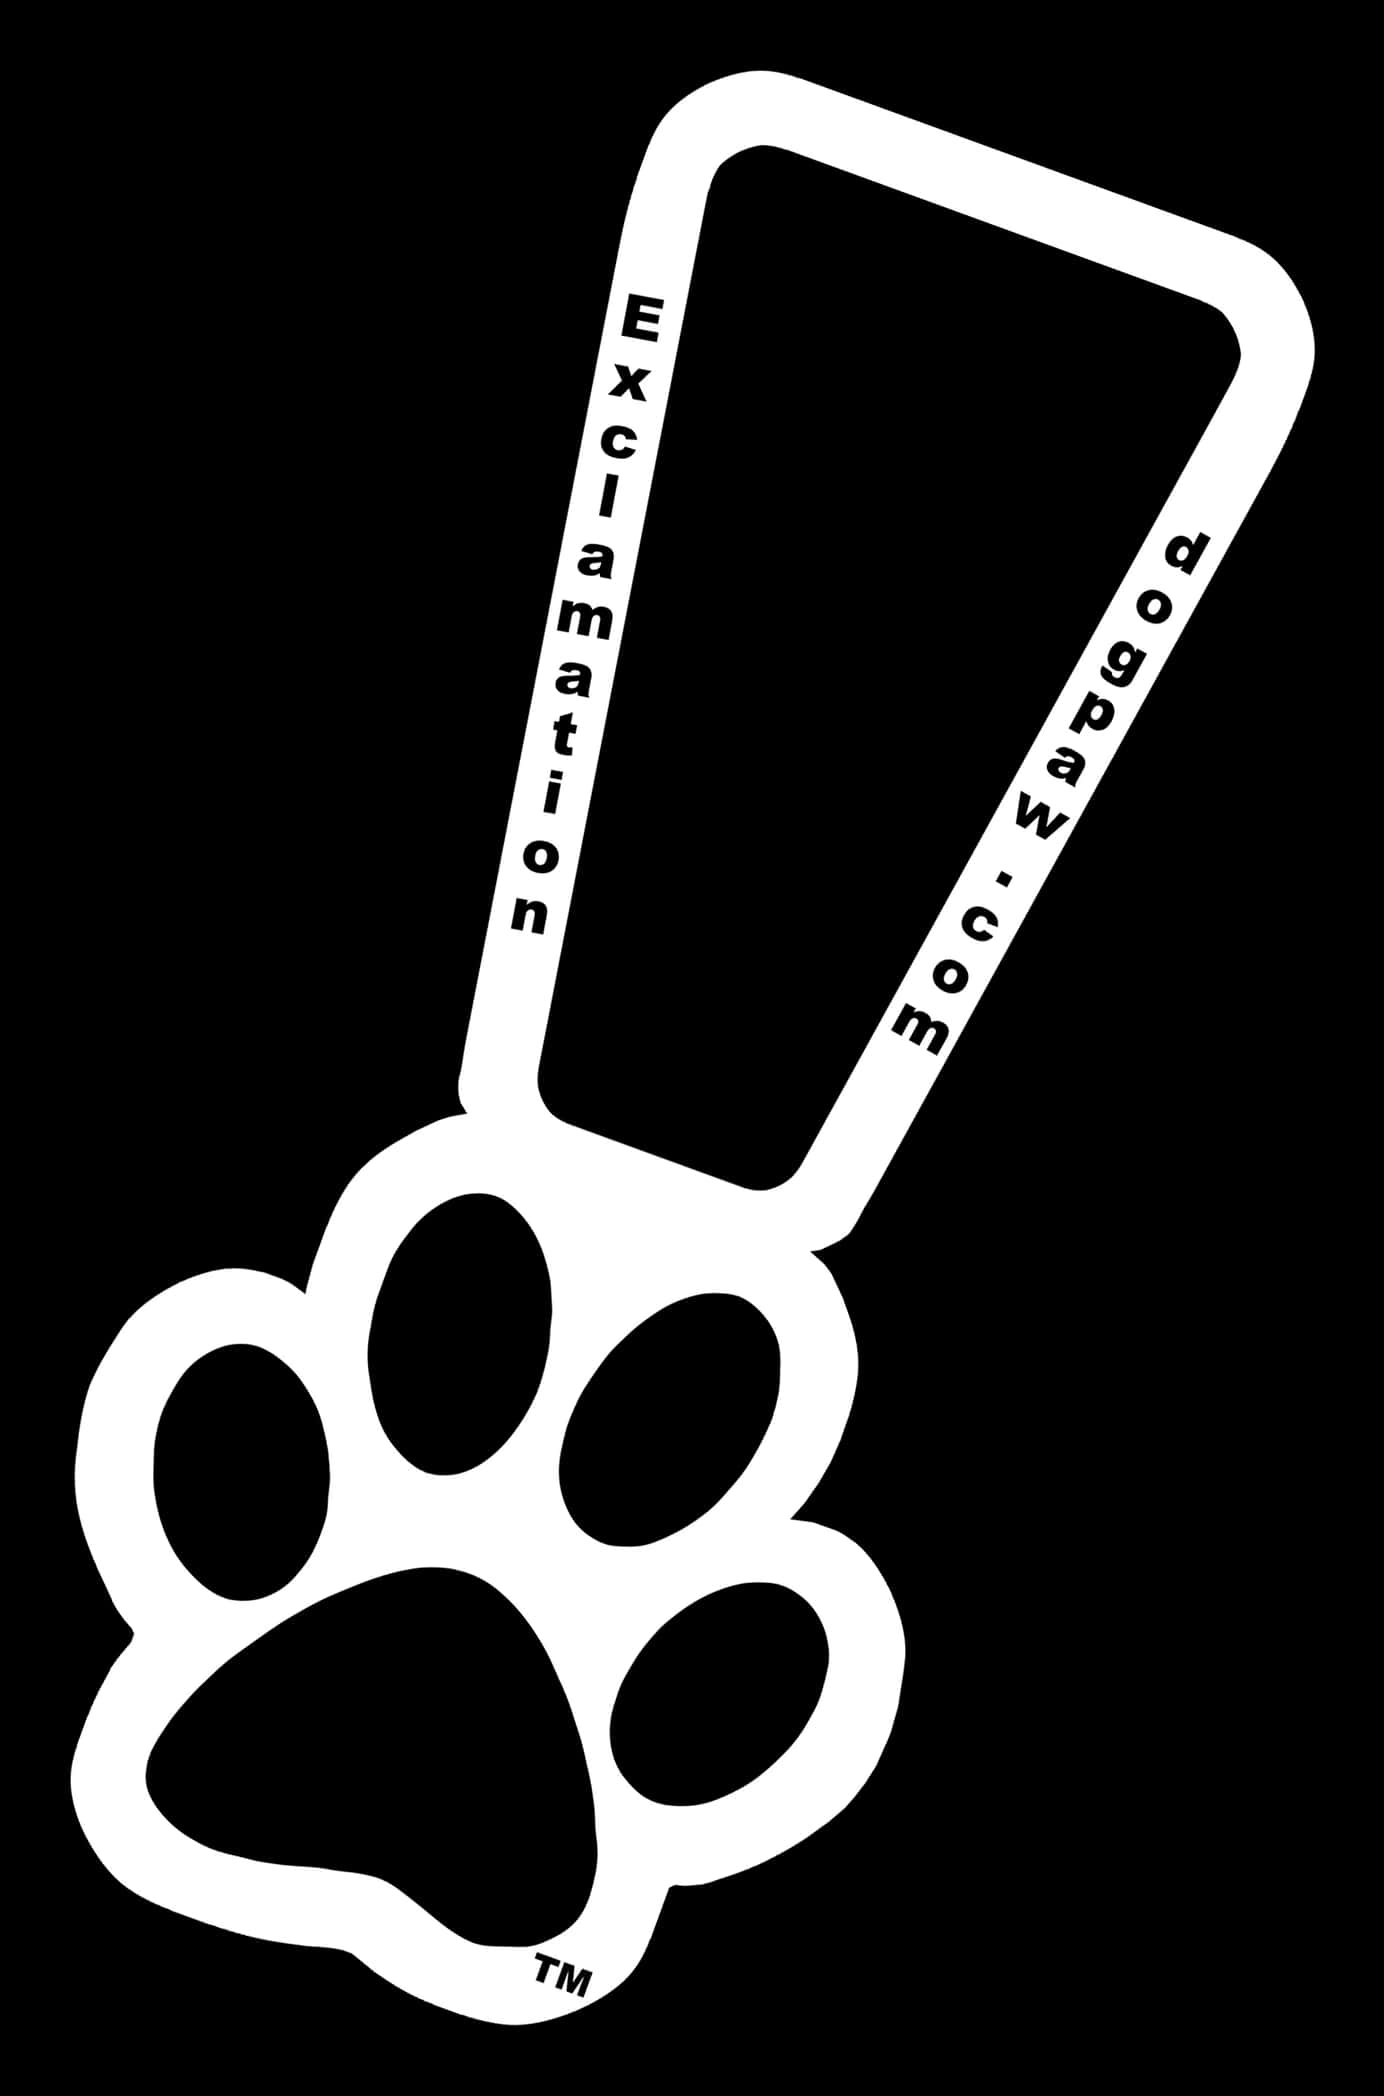 Exclamation Paw Graphic Blackand White PNG image